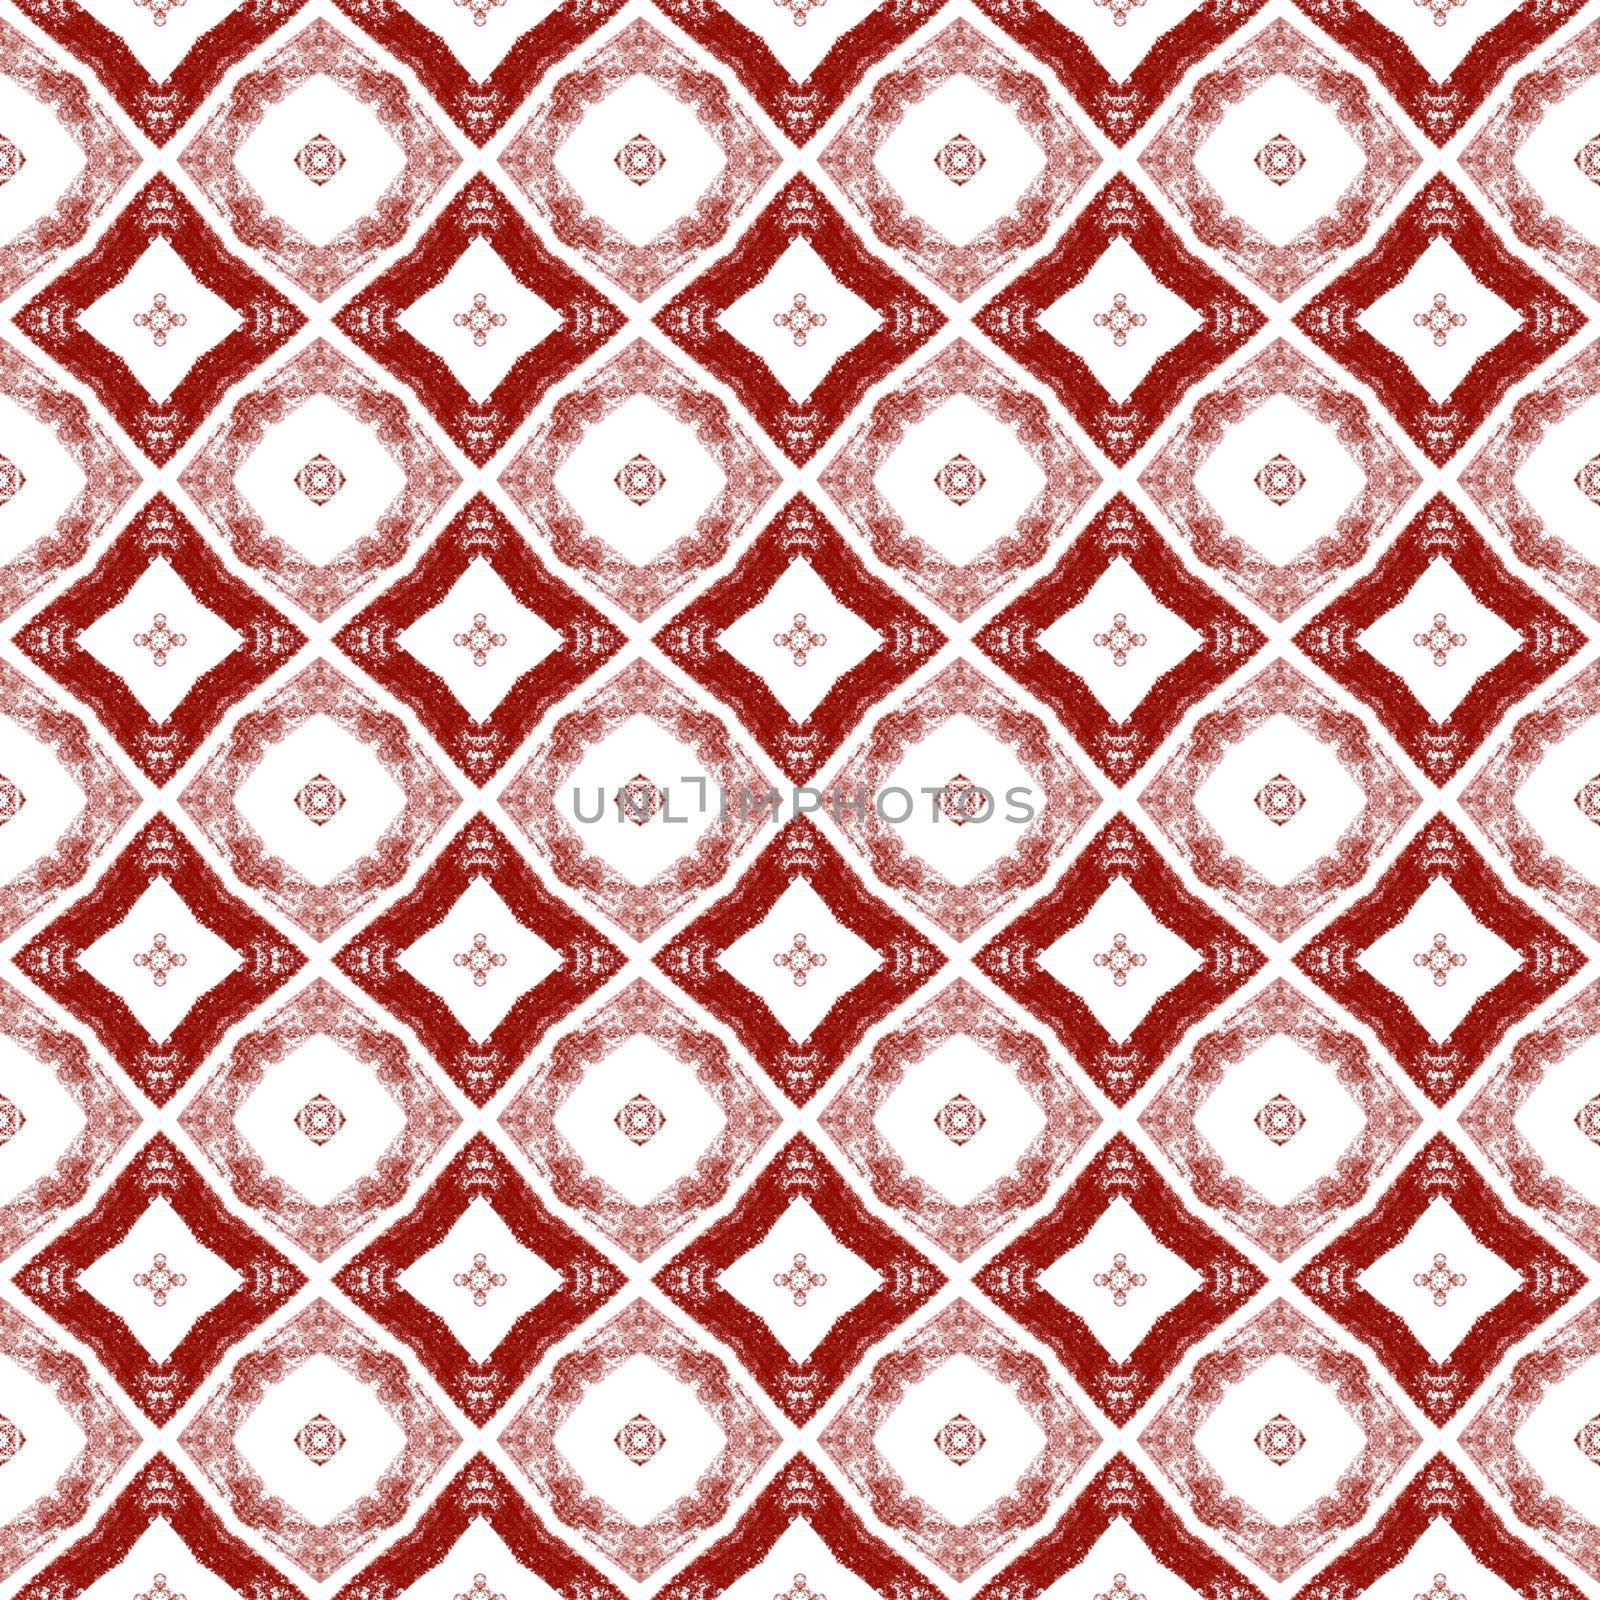 Striped hand drawn pattern. Wine red symmetrical kaleidoscope background. Repeating striped hand drawn tile. Textile ready juicy print, swimwear fabric, wallpaper, wrapping.